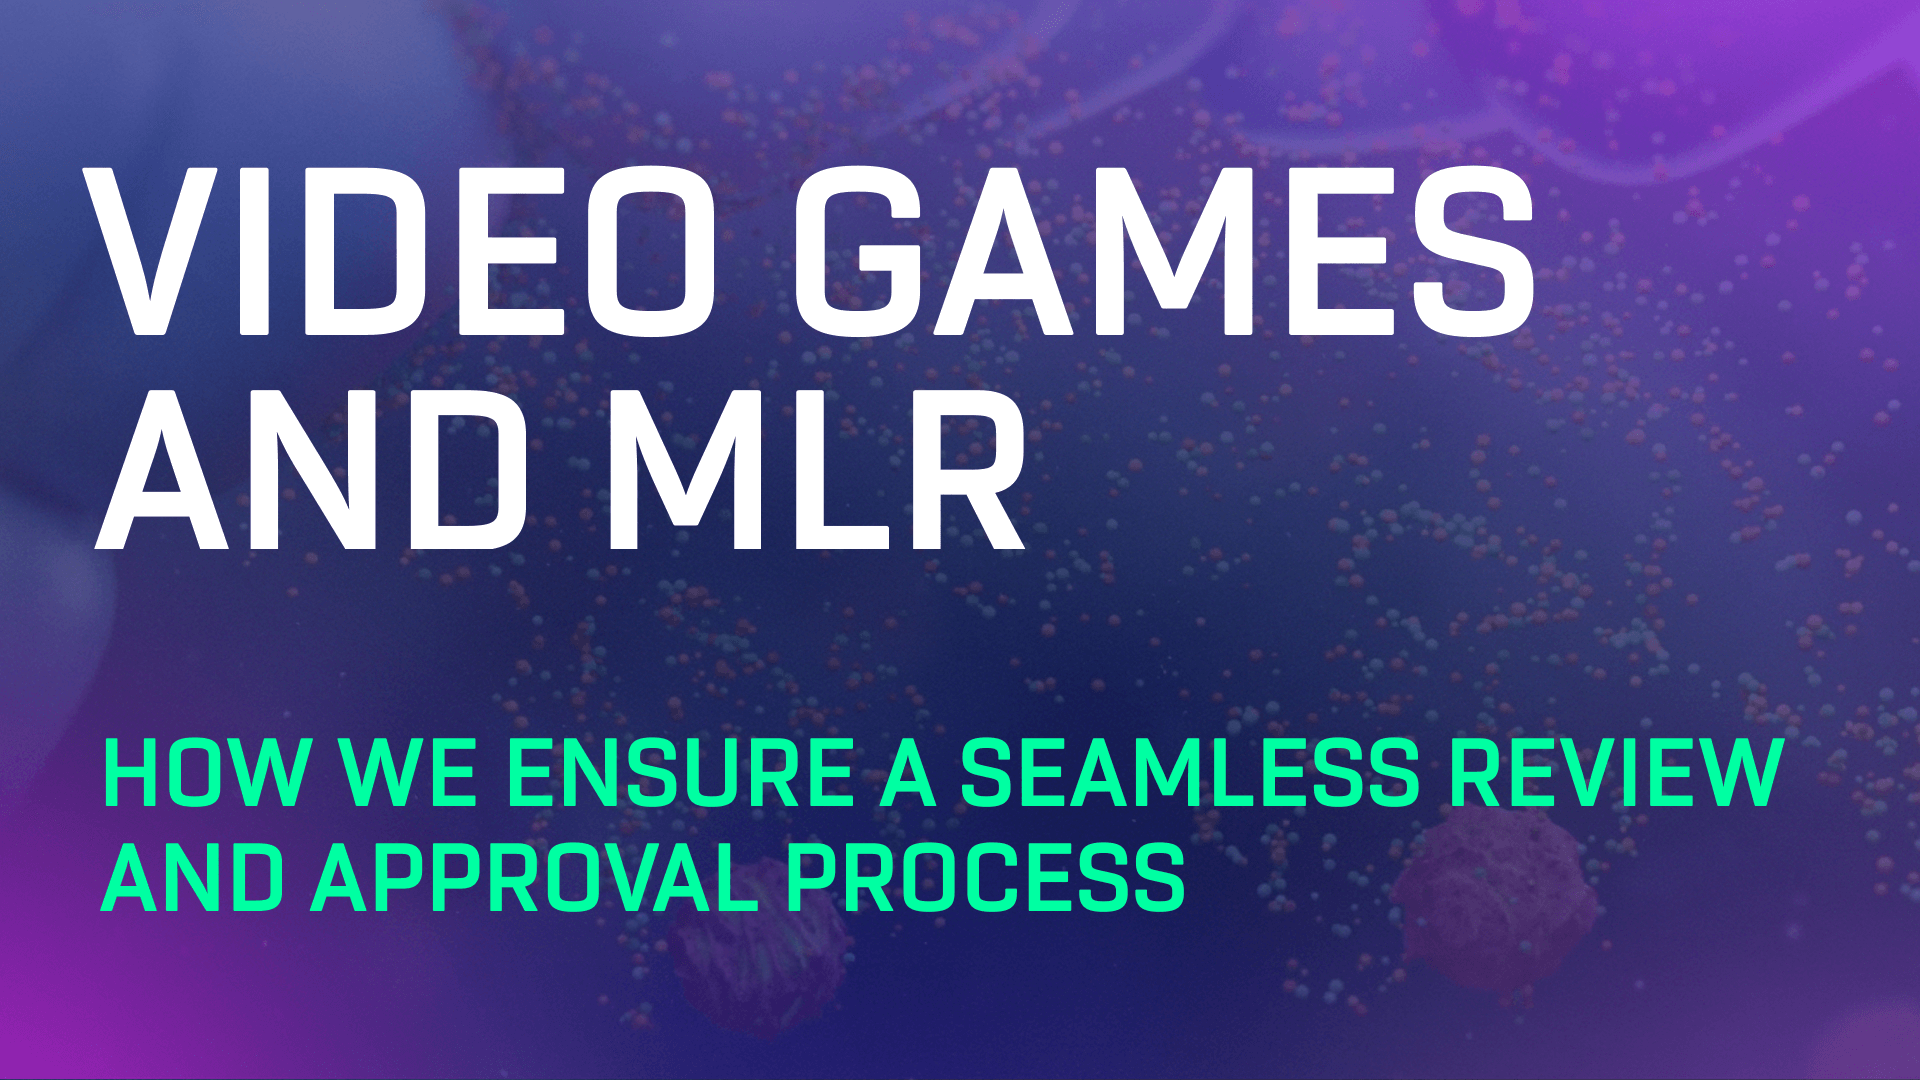 Part 1: Video Games and MLR: How We Ensure Seamless Approval